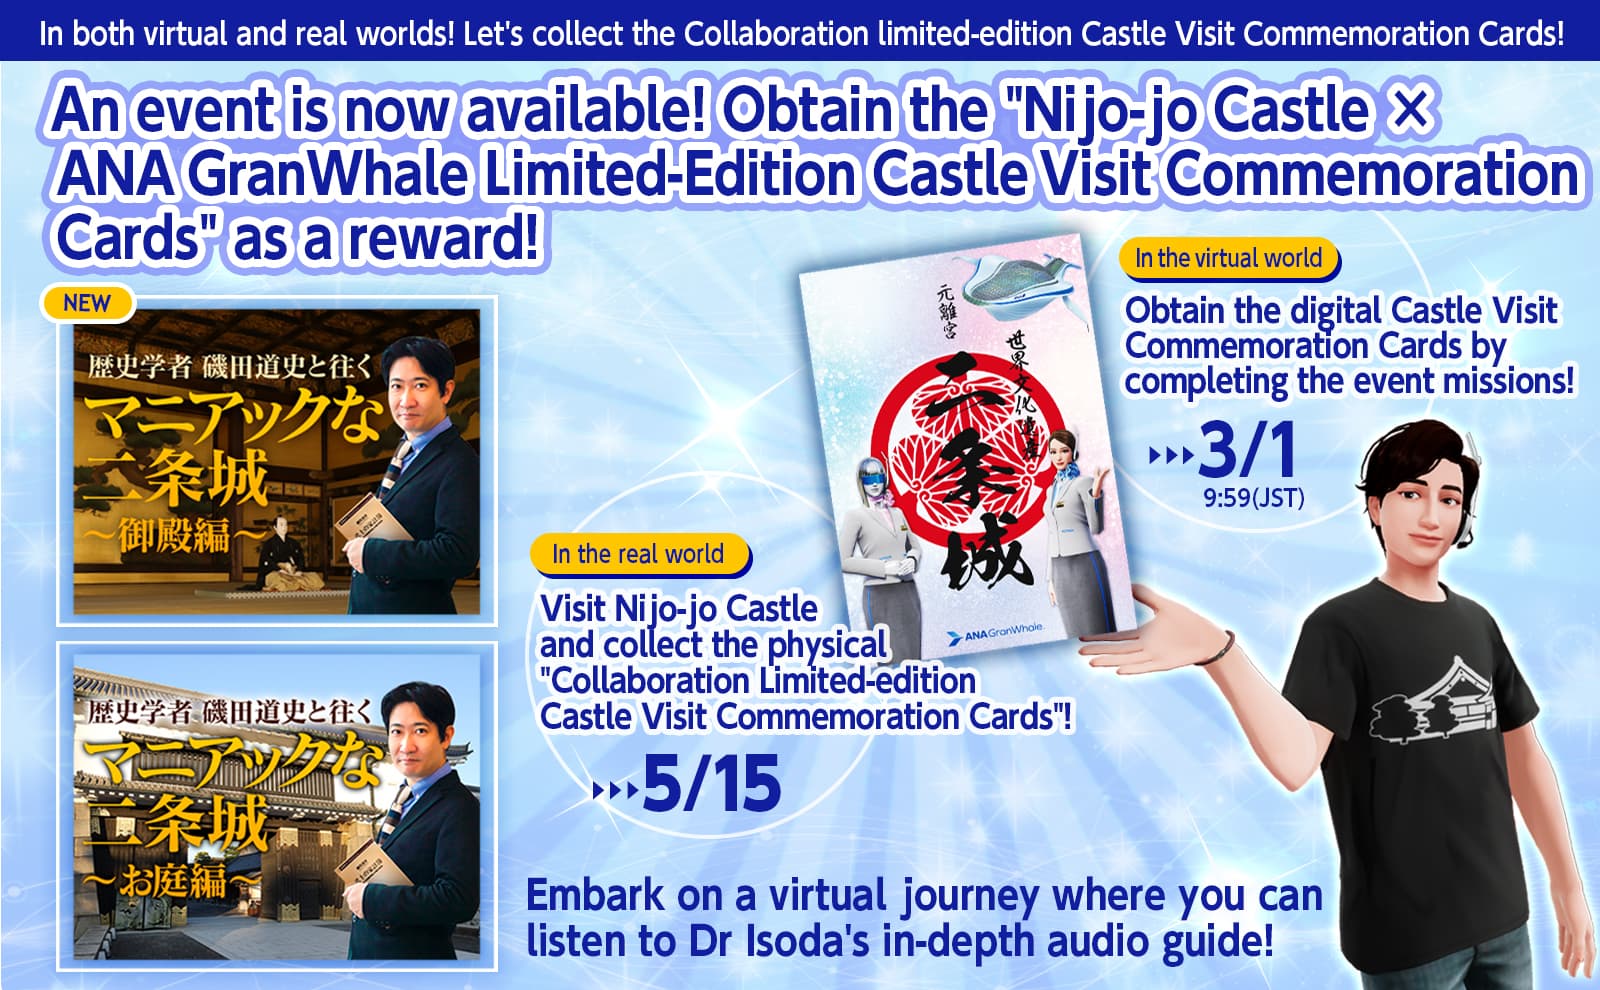 An event is now available in both virtual and real worlds! Obtain the 'Nijo-jo Castle × ANA GranWhale Limited-Edition Castle Visit Commemoration Cards' as a reward! 